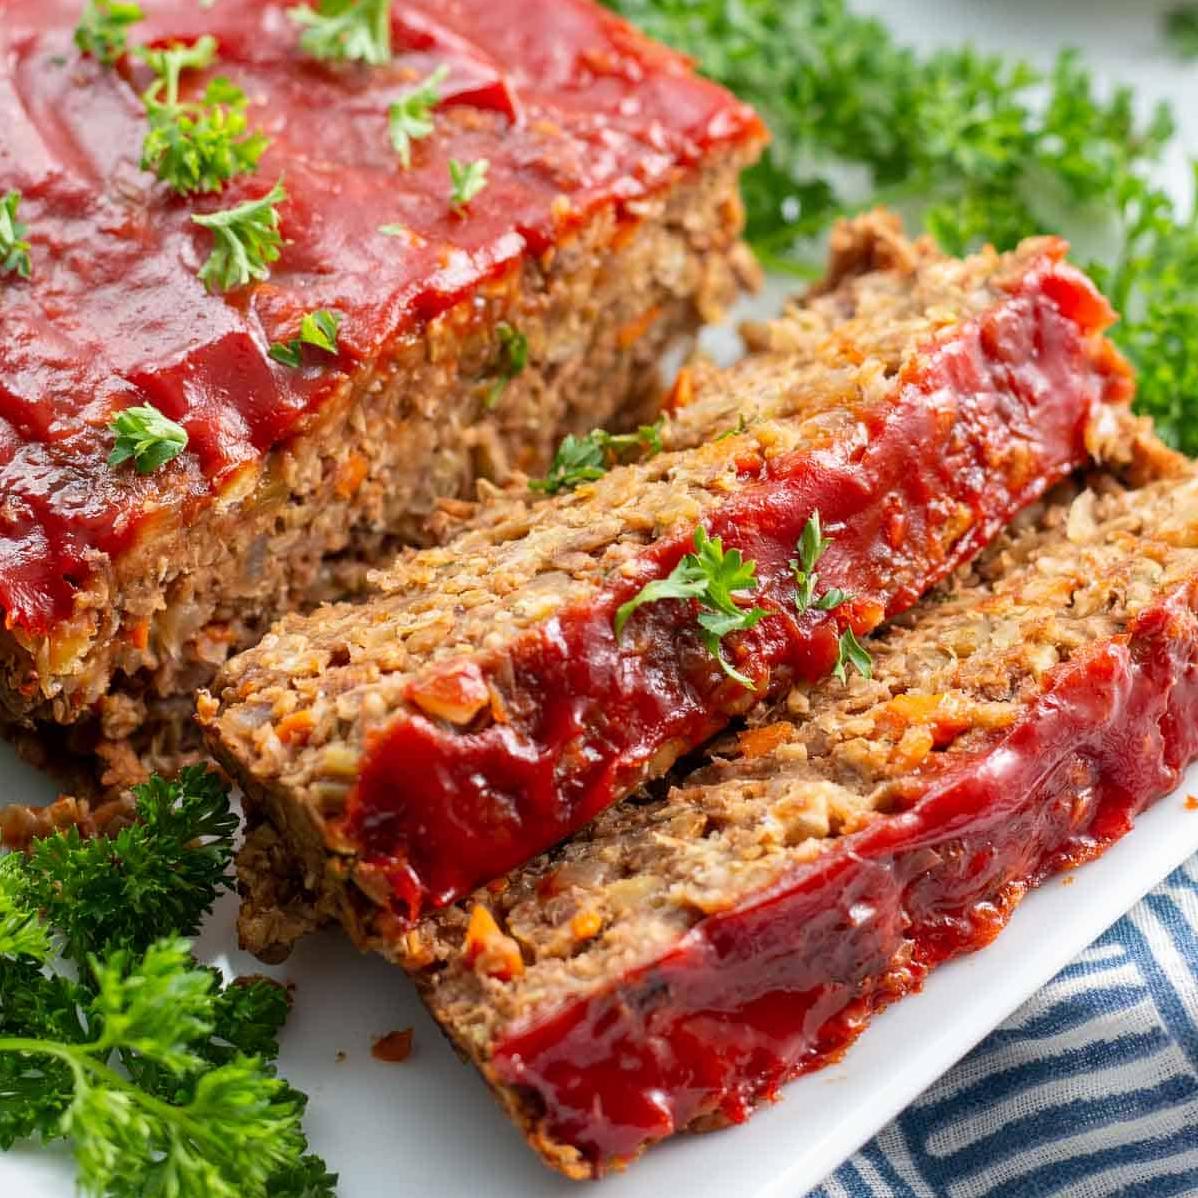  This vegan lentil loaf is the perfect main course to celebrate the holidays with family and friends.